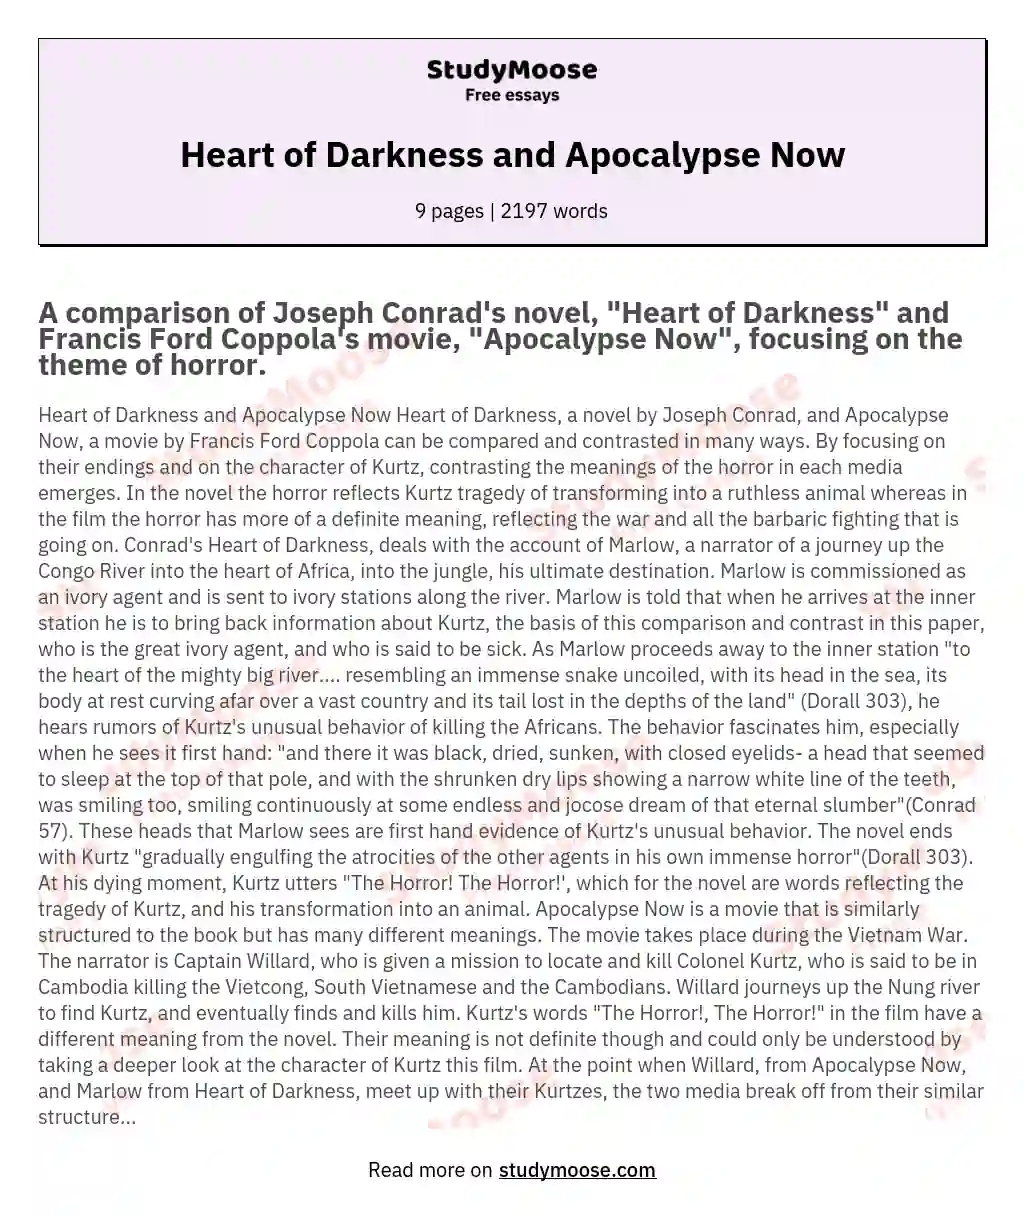 Heart of Darkness and Apocalypse Now essay